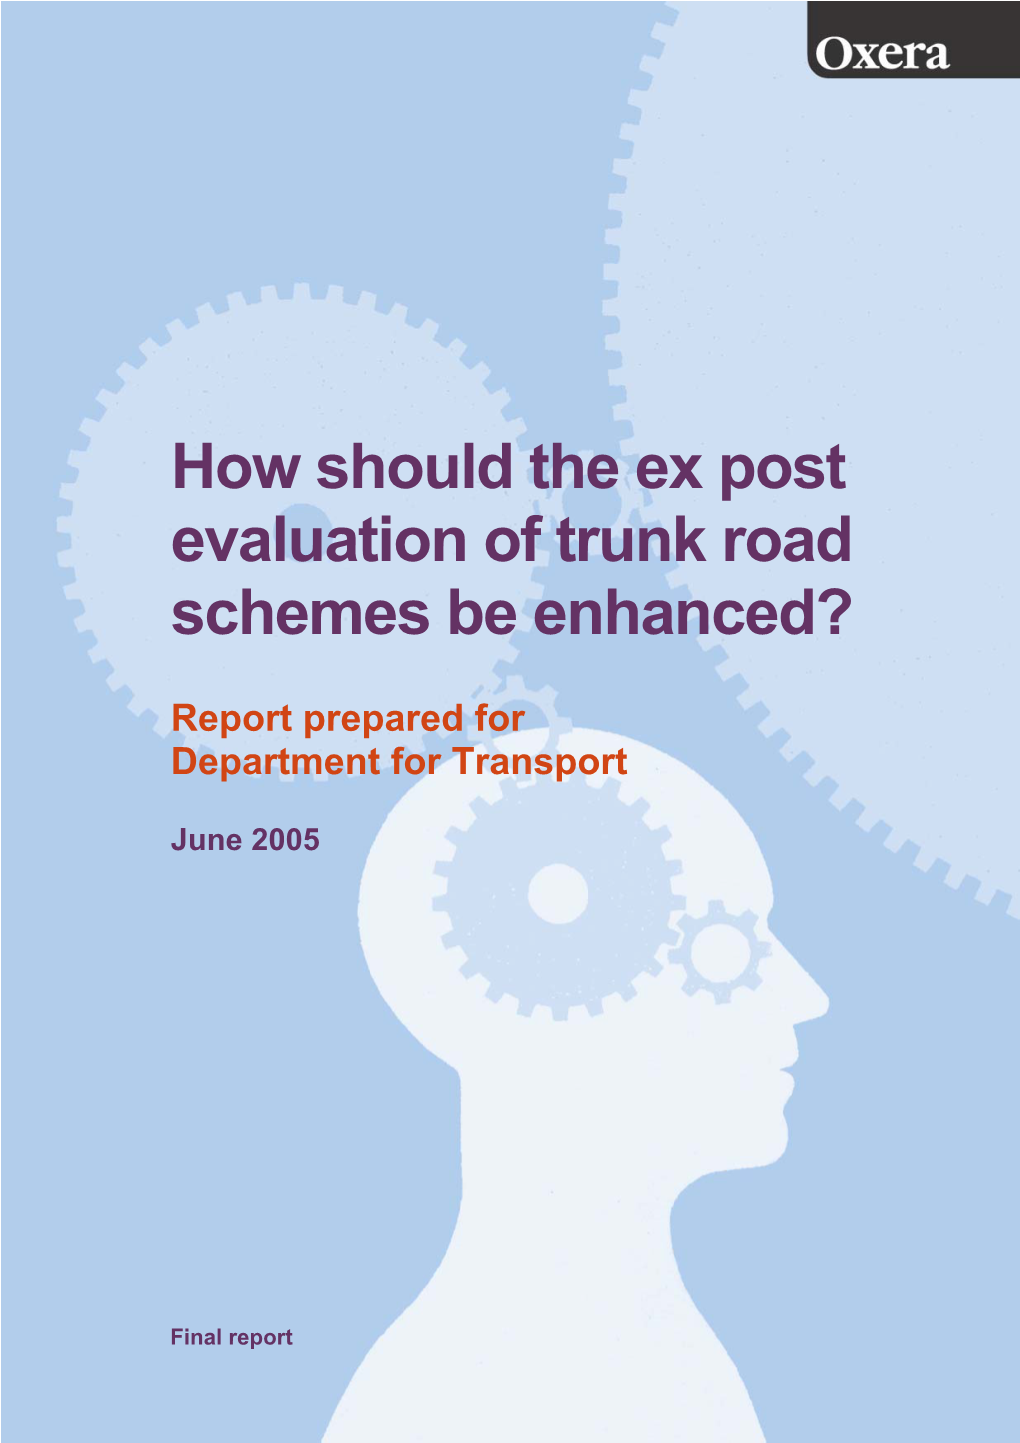 How Should the Ex Post Evaluation of Trunk Road Schemes Be Enhanced?